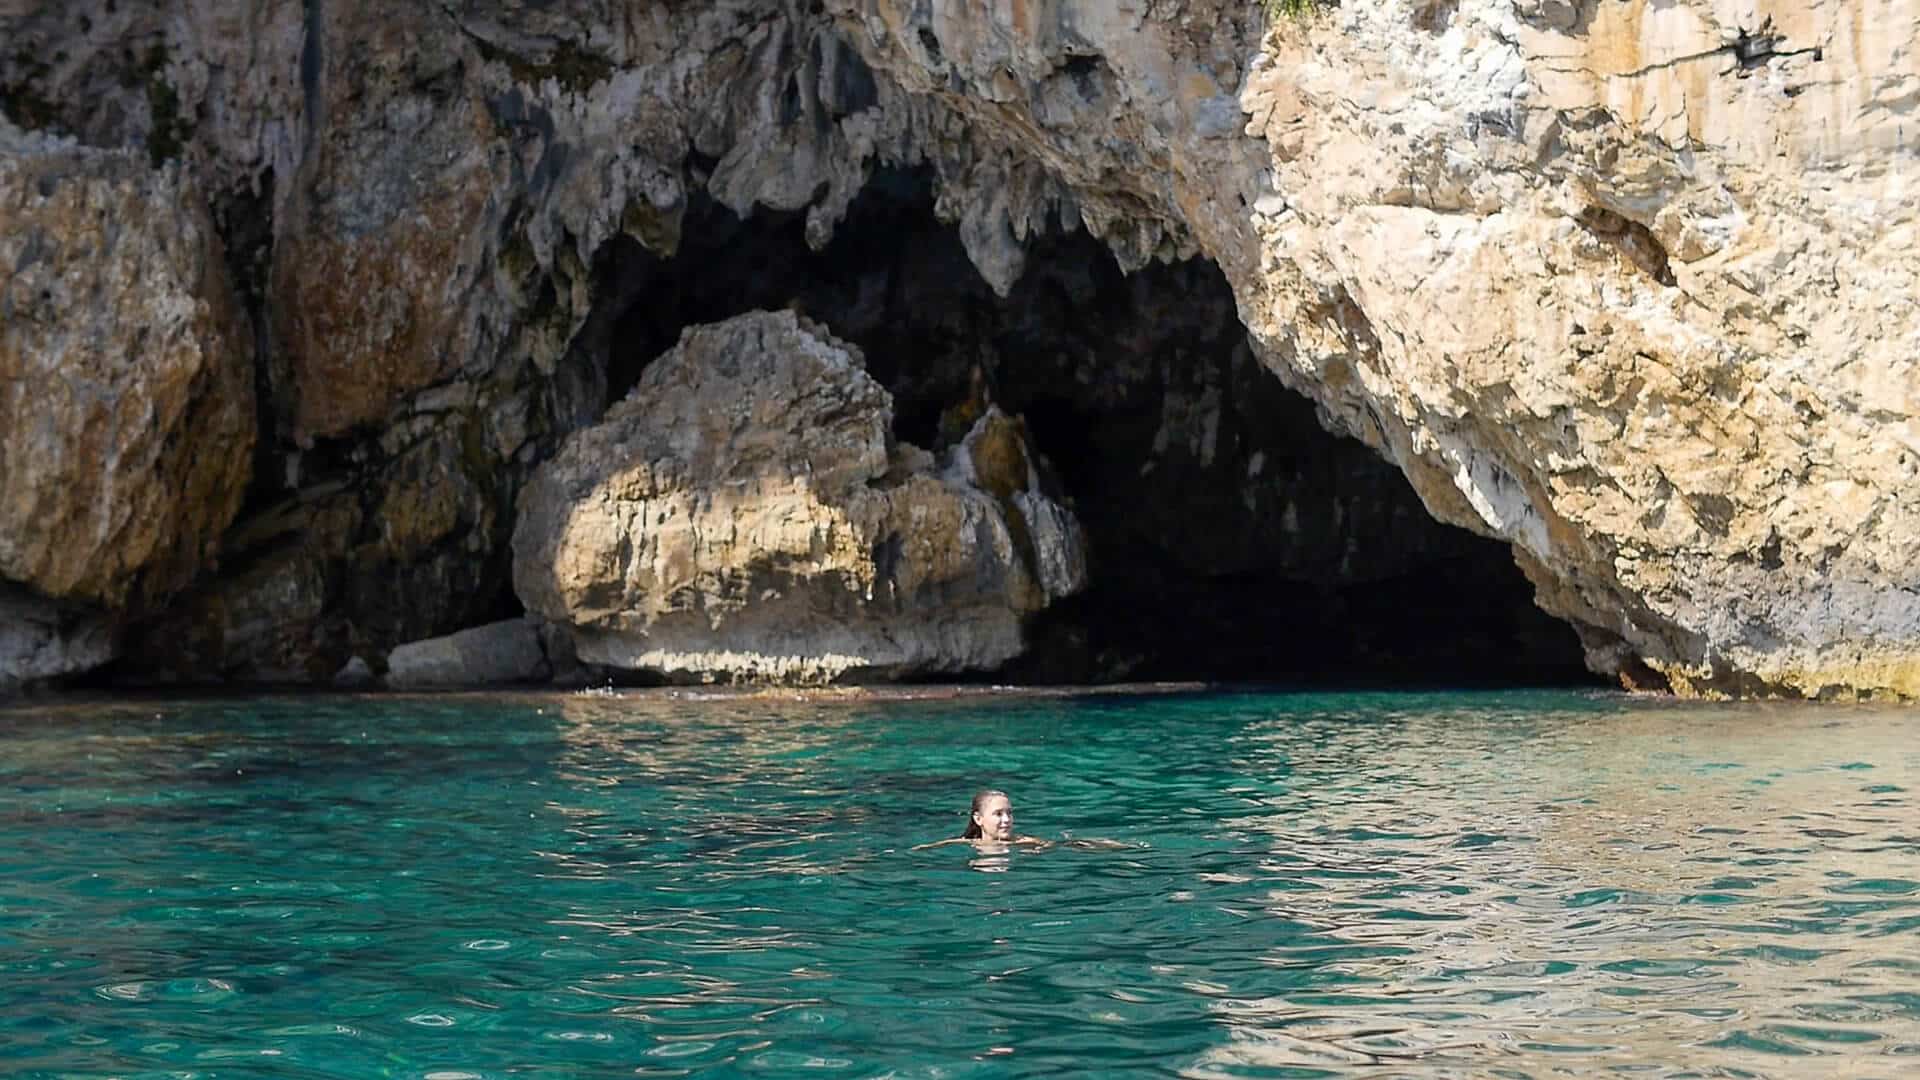 A woman swimmng in front of the sea ​​cave of Panagia Megalomata, during the boat trip “Mamma Mia” provided by the tour agency Pelion Scout.